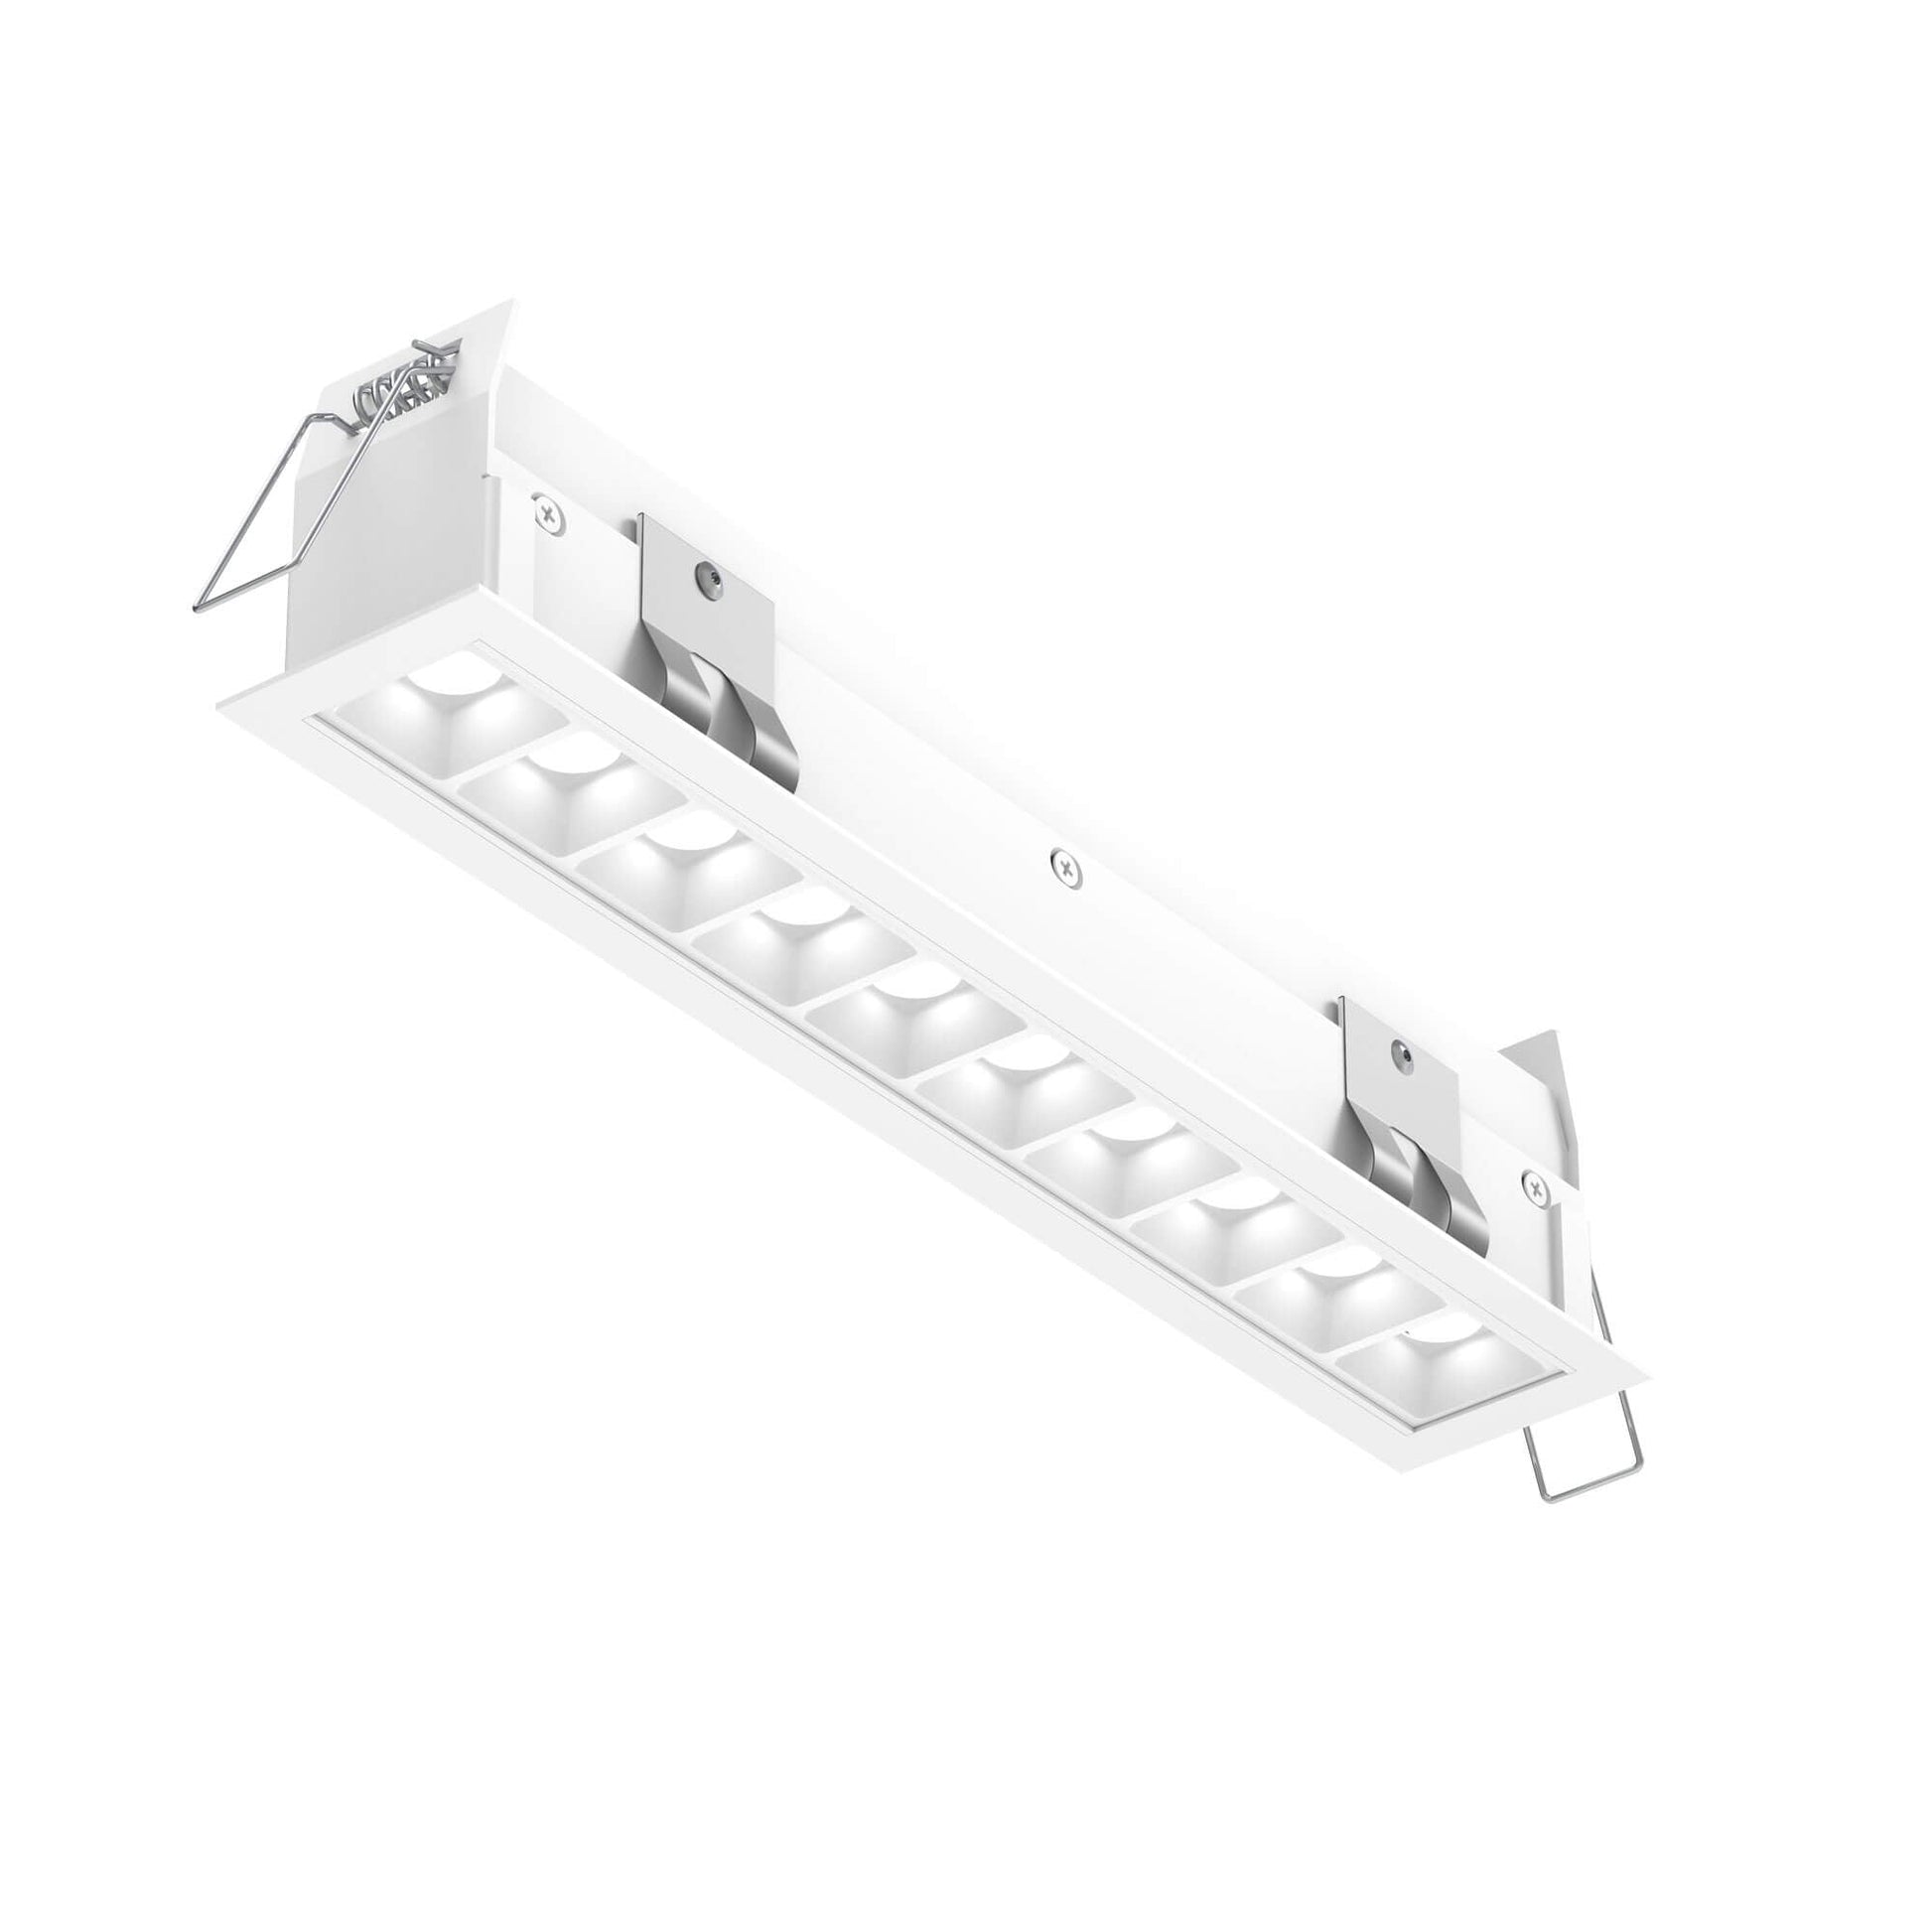 DALS-MSL10-CC-AWHDals Lighting MSL10-CC 11" 24W LED Recessed Multiple Downlight Selectable CCT